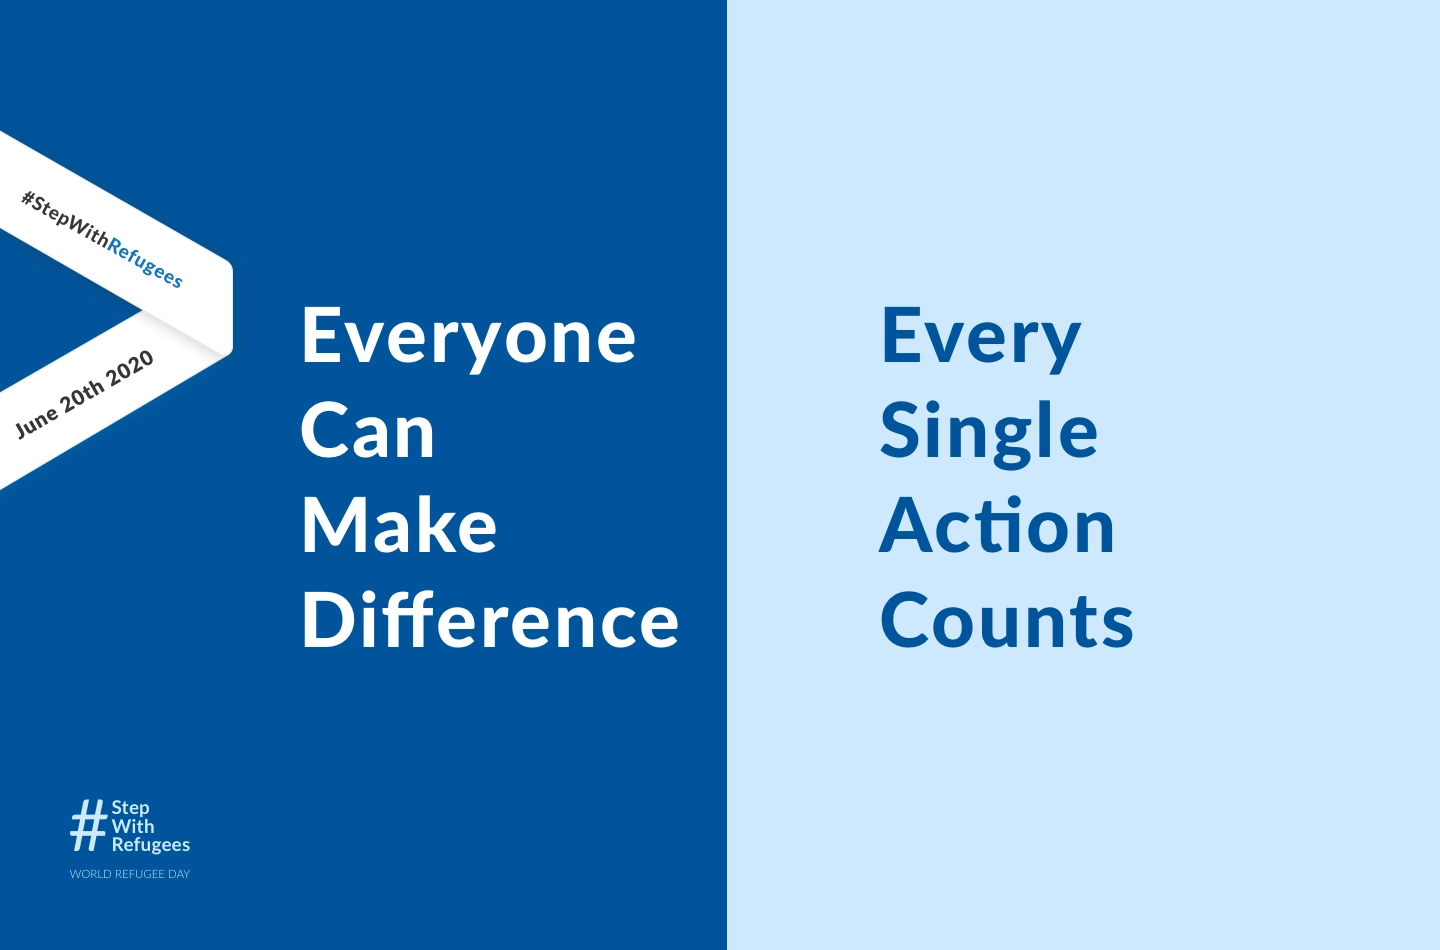 Every-Action-Counts-1